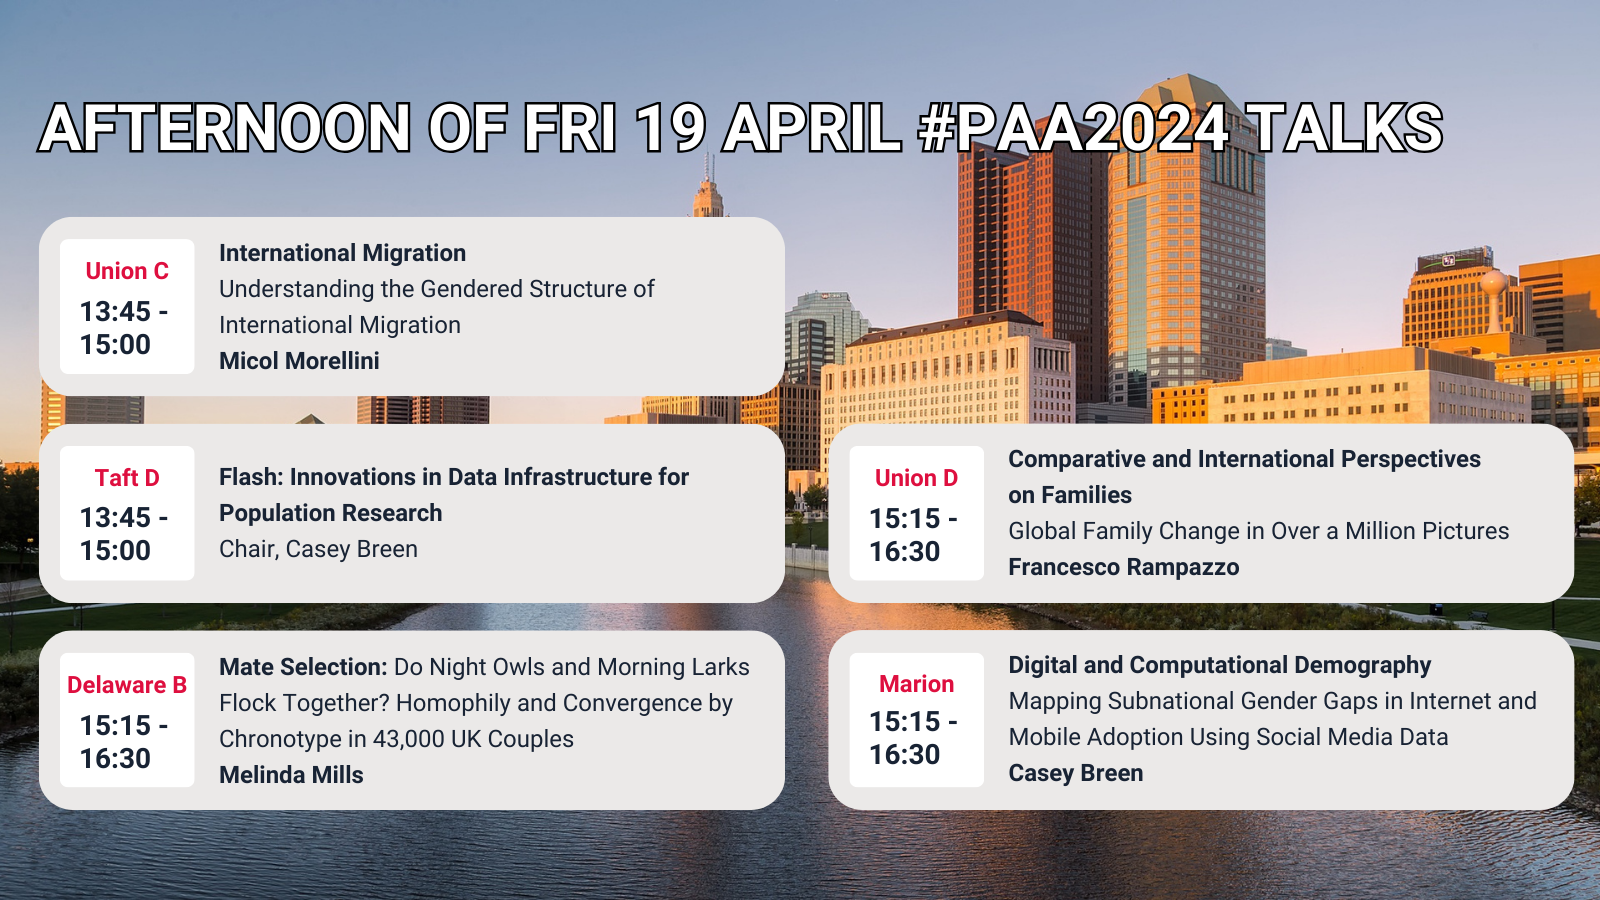 PAA 2024 programme afternoon of Friday 19 April